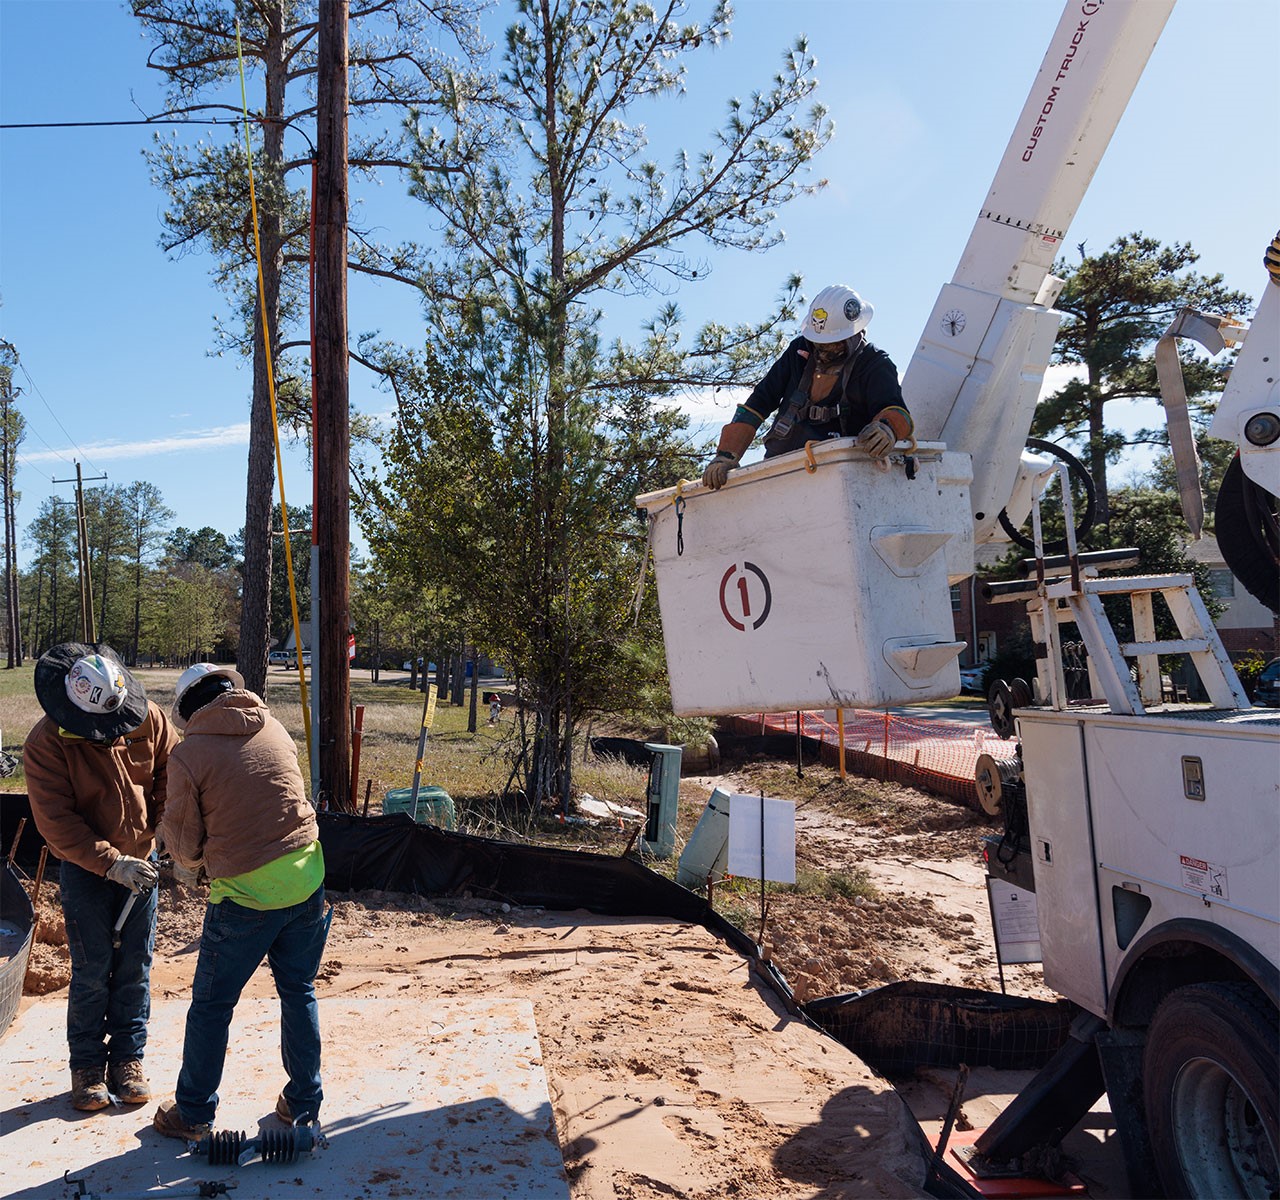 Lineworkers restoring power in Conroe and Trinity Texas